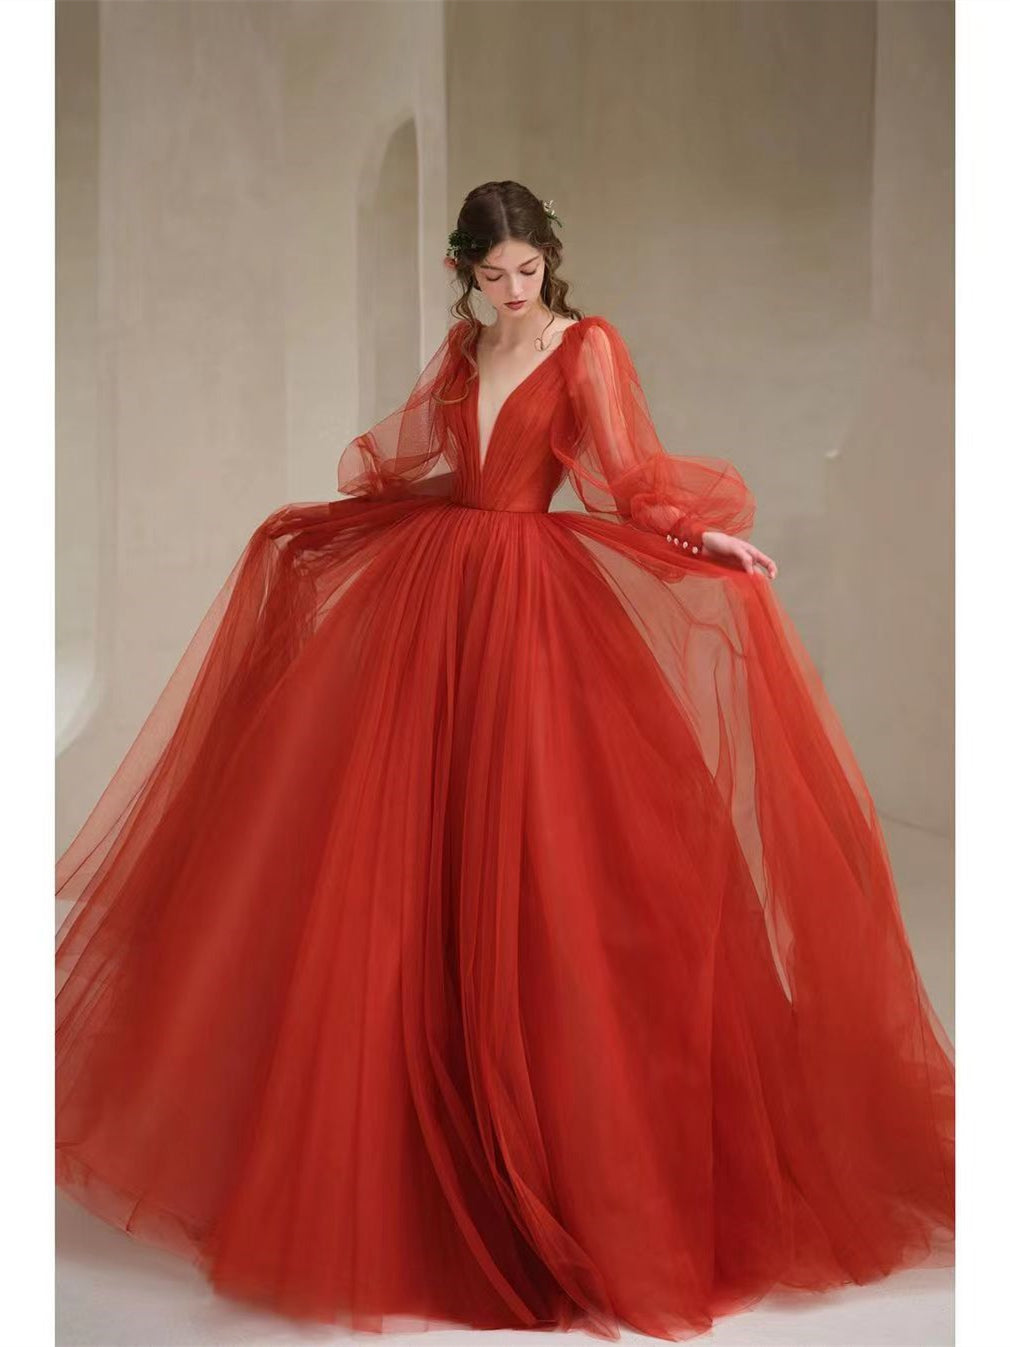 Plunge V-neck Red Tulle Princess Dresses, A-line Prom Dresses, Bubble Sleeves Prom Dresses